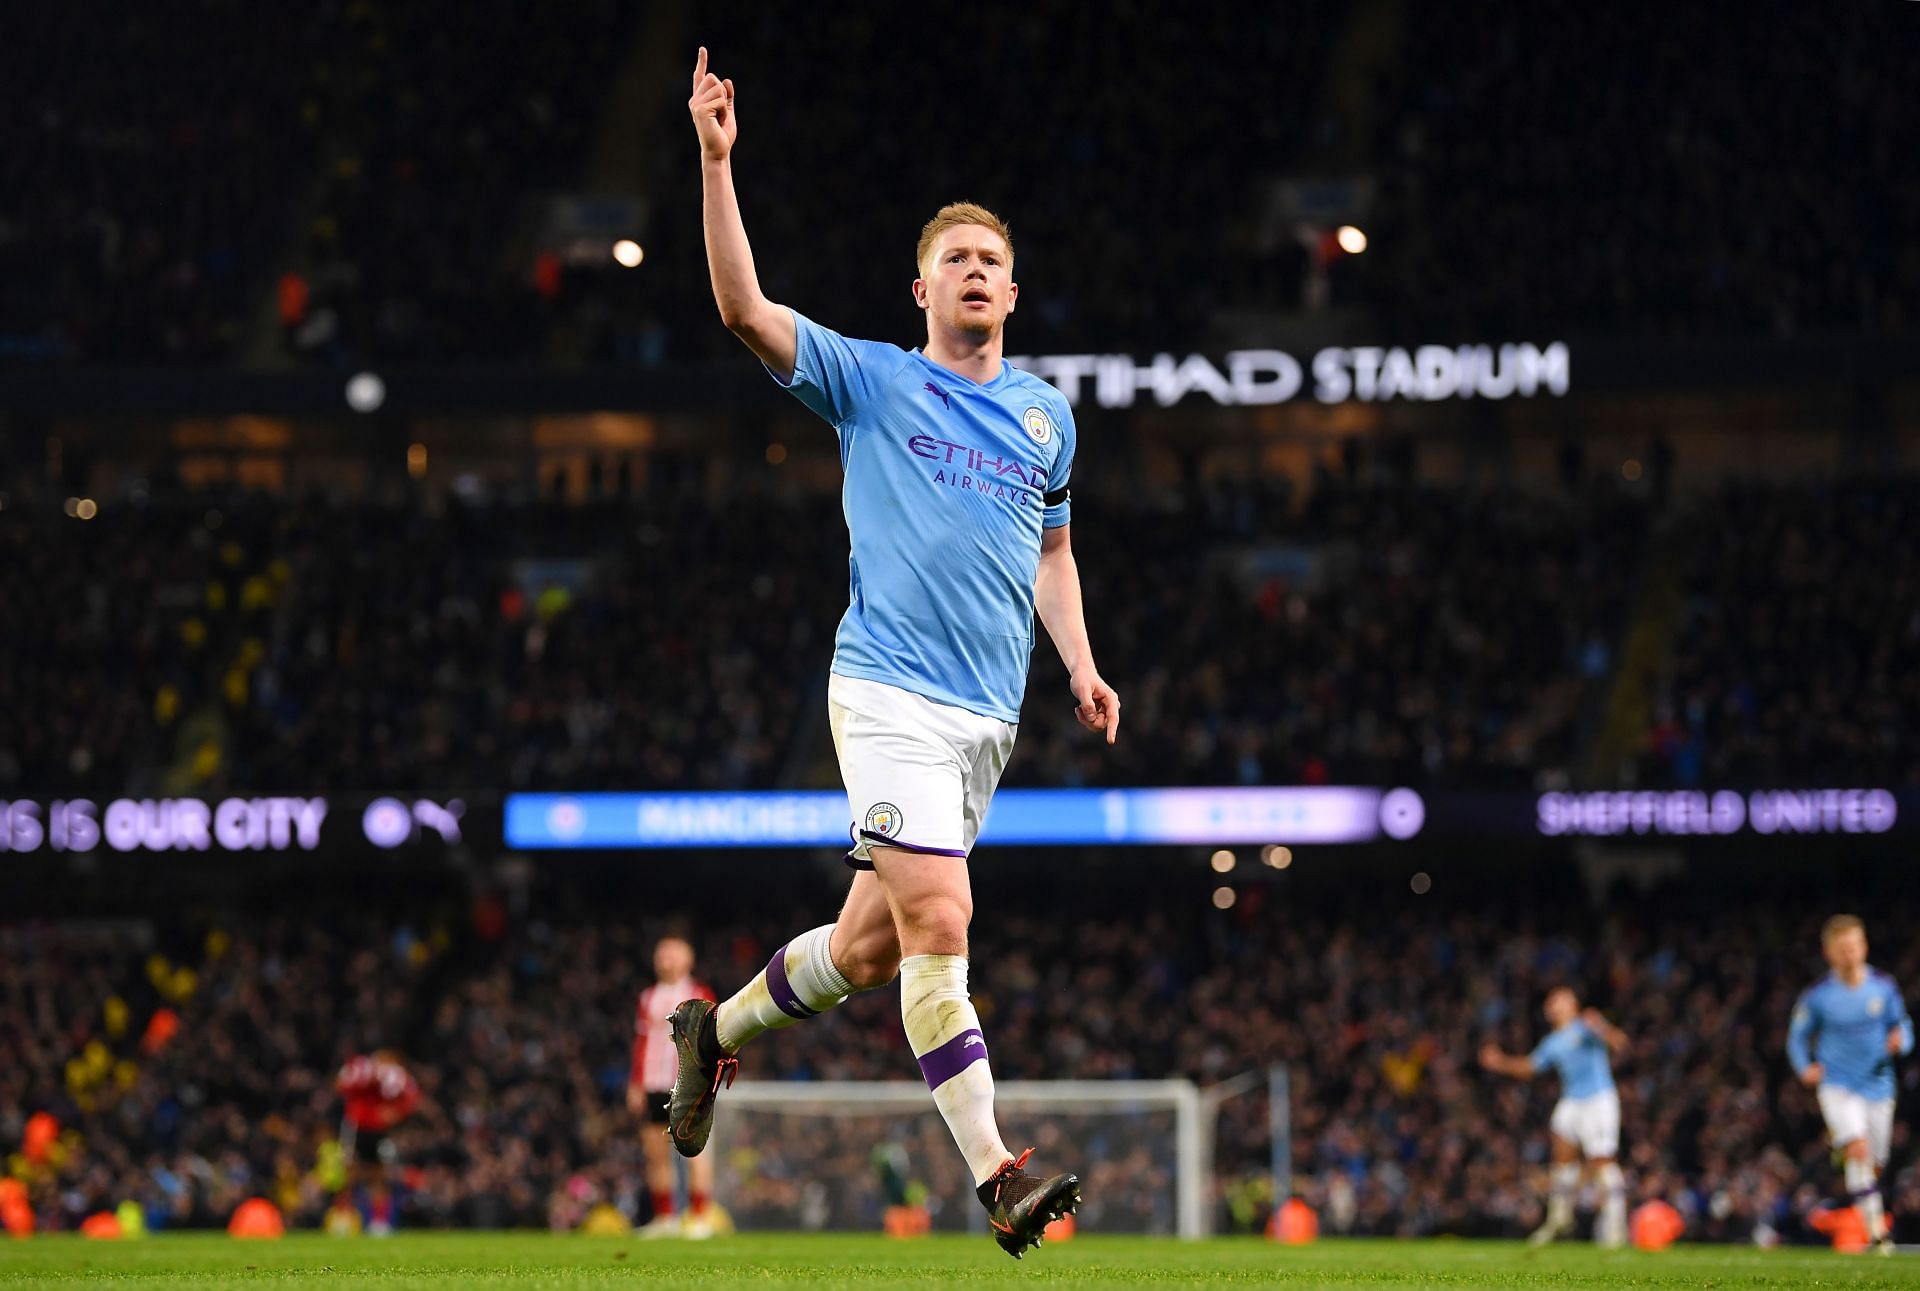 Kevin De Bruyne is one of the best midfielders in the world right now